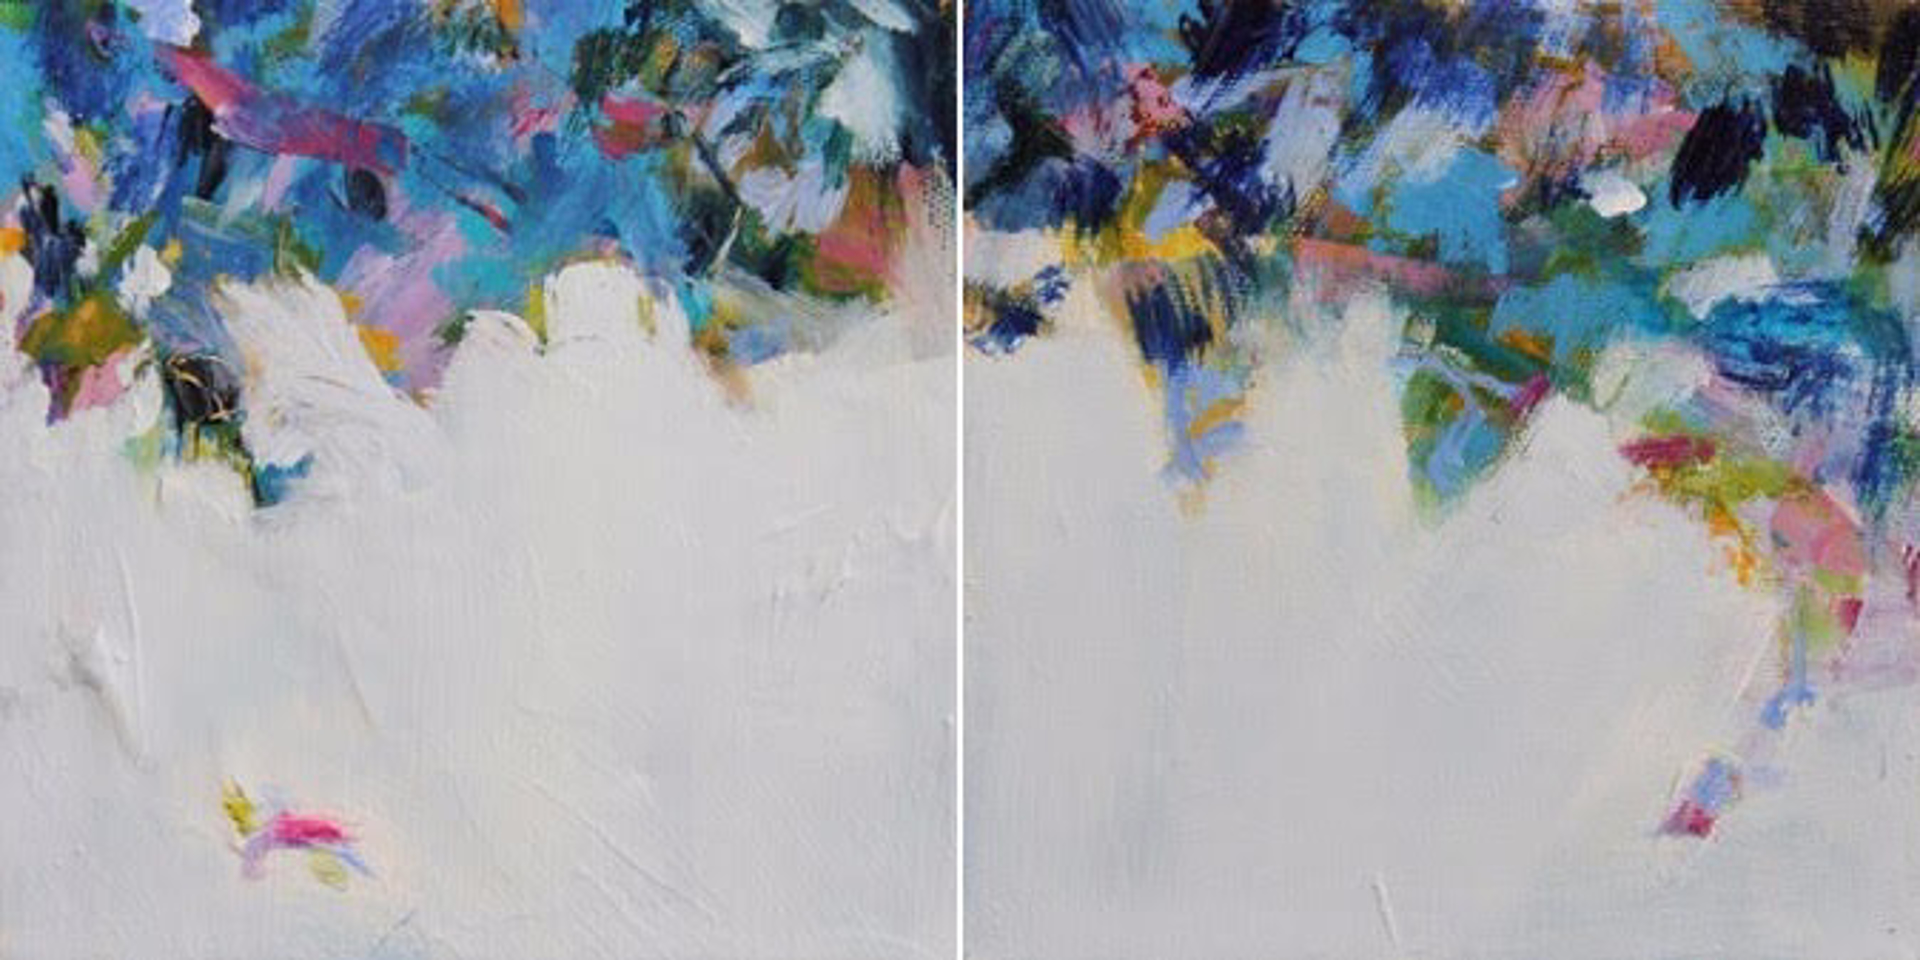 Blue Canopy (Diptych) by Maria Burtis